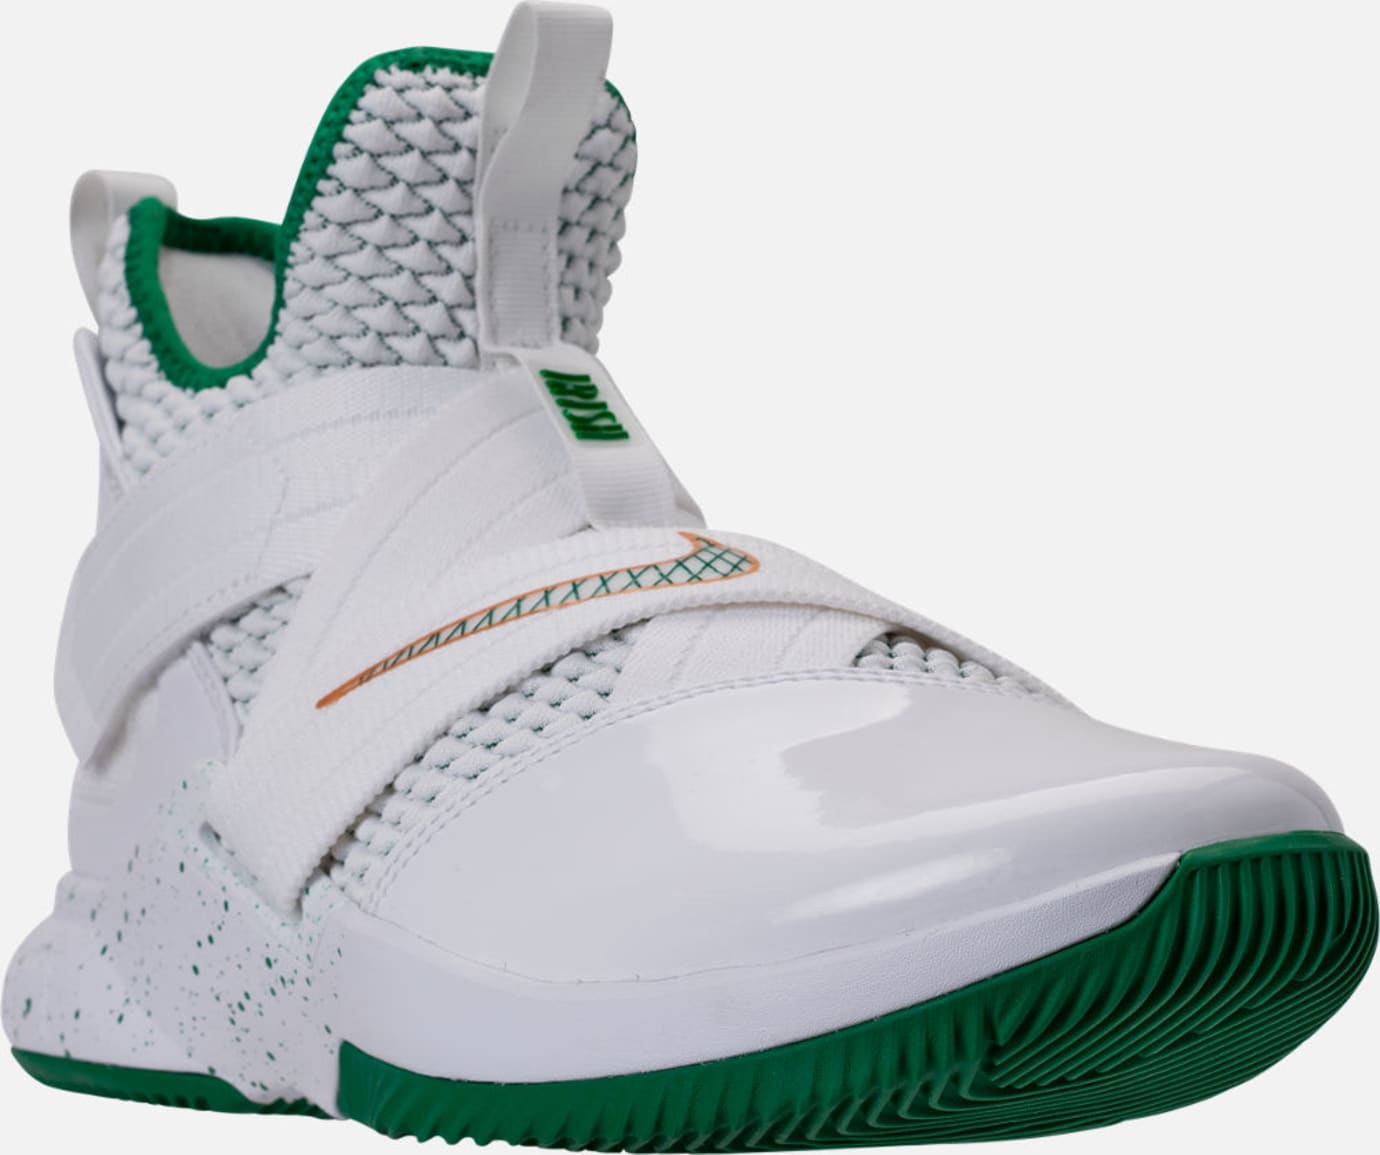 lebron soldier 12 white and green